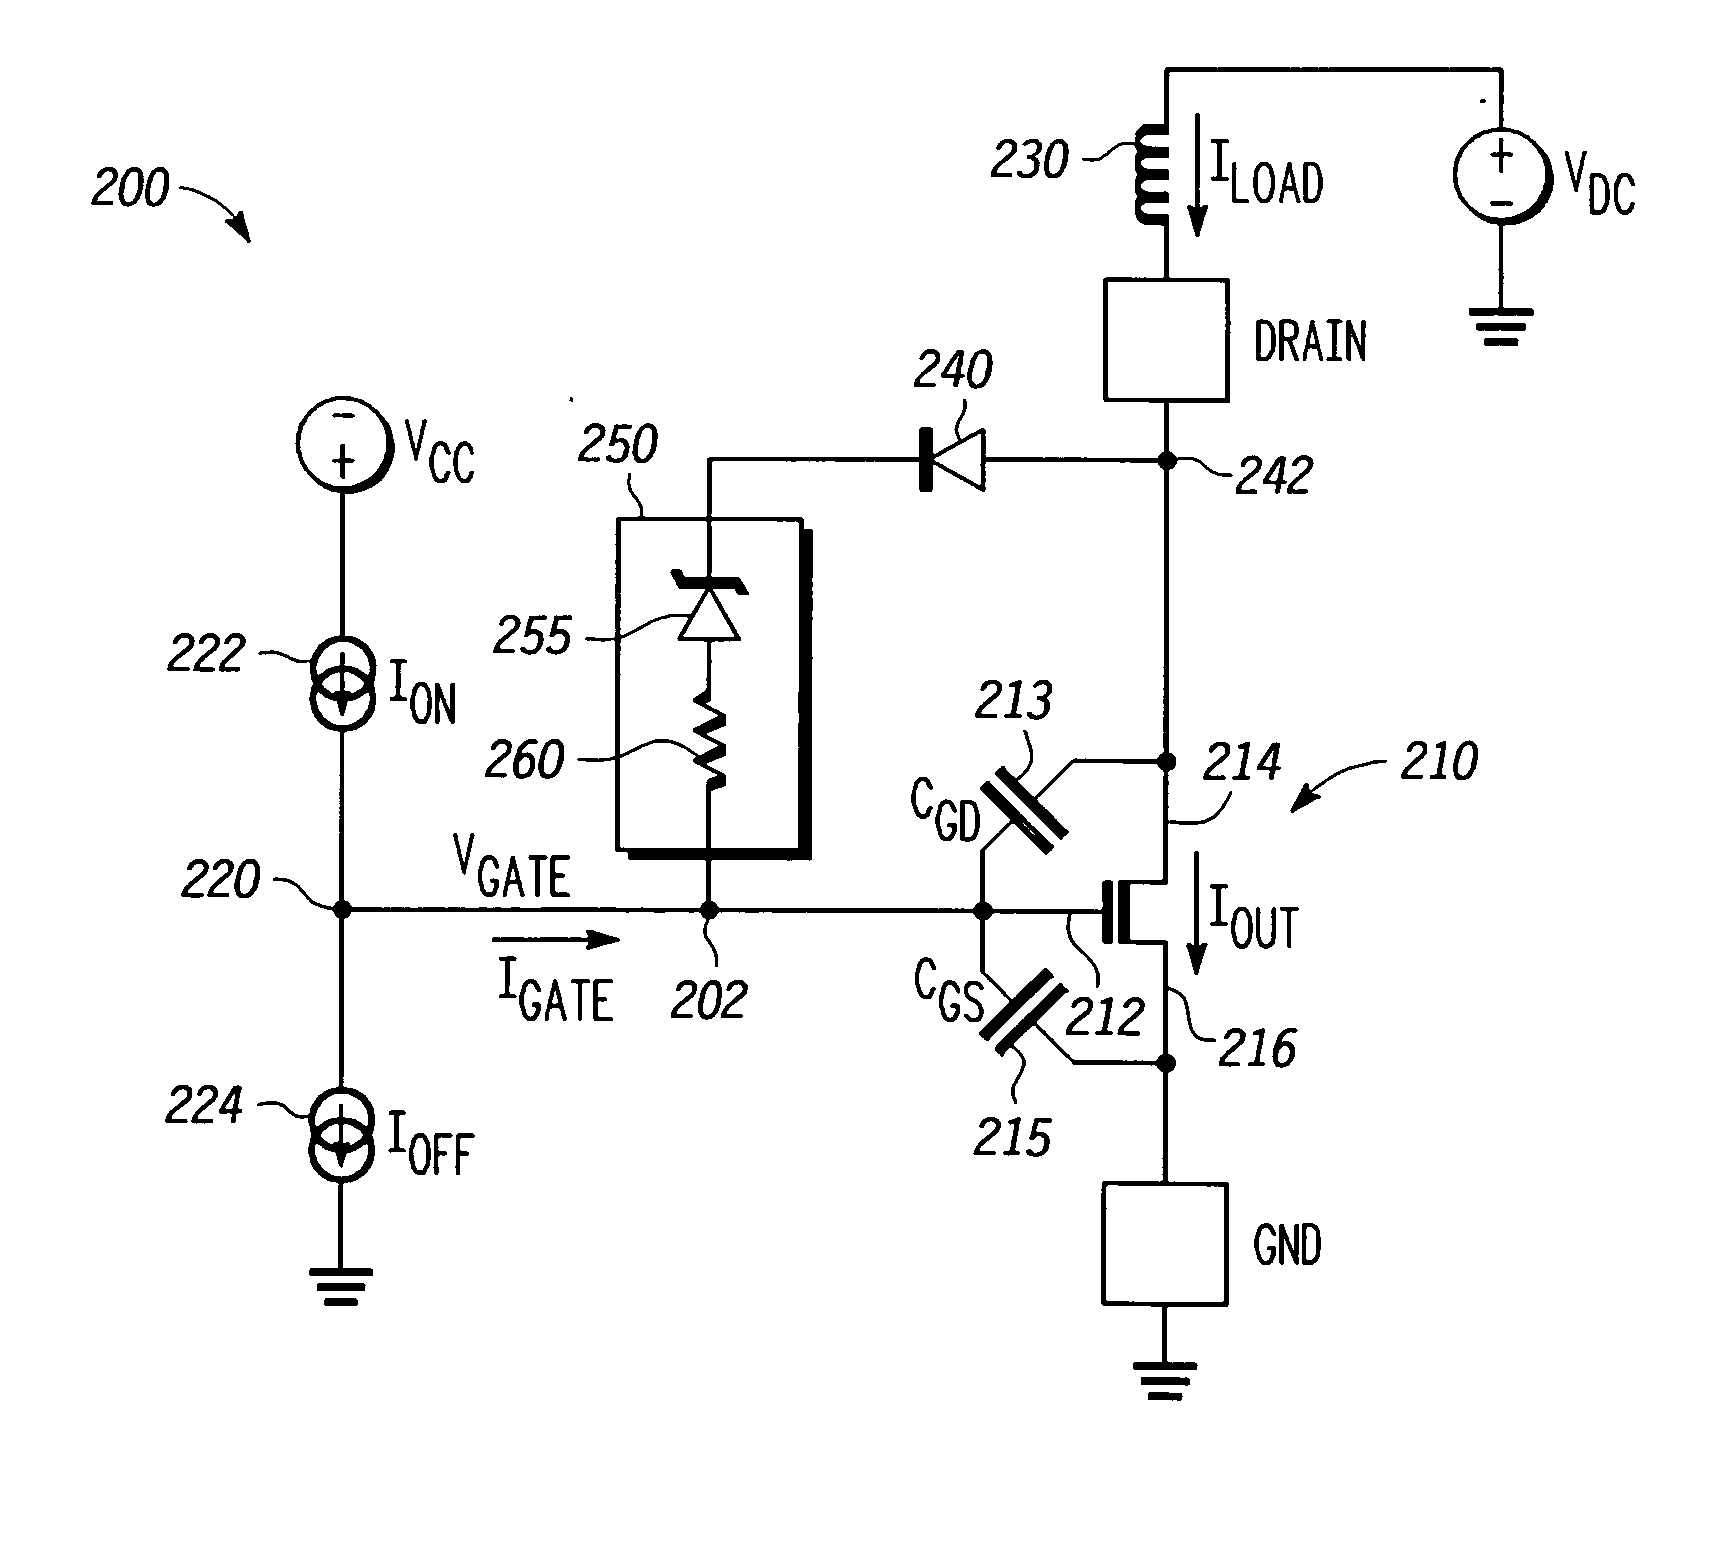 Slew-rate control apparatus and methods for a power transistor to reduce voltage transients during inductive flyback